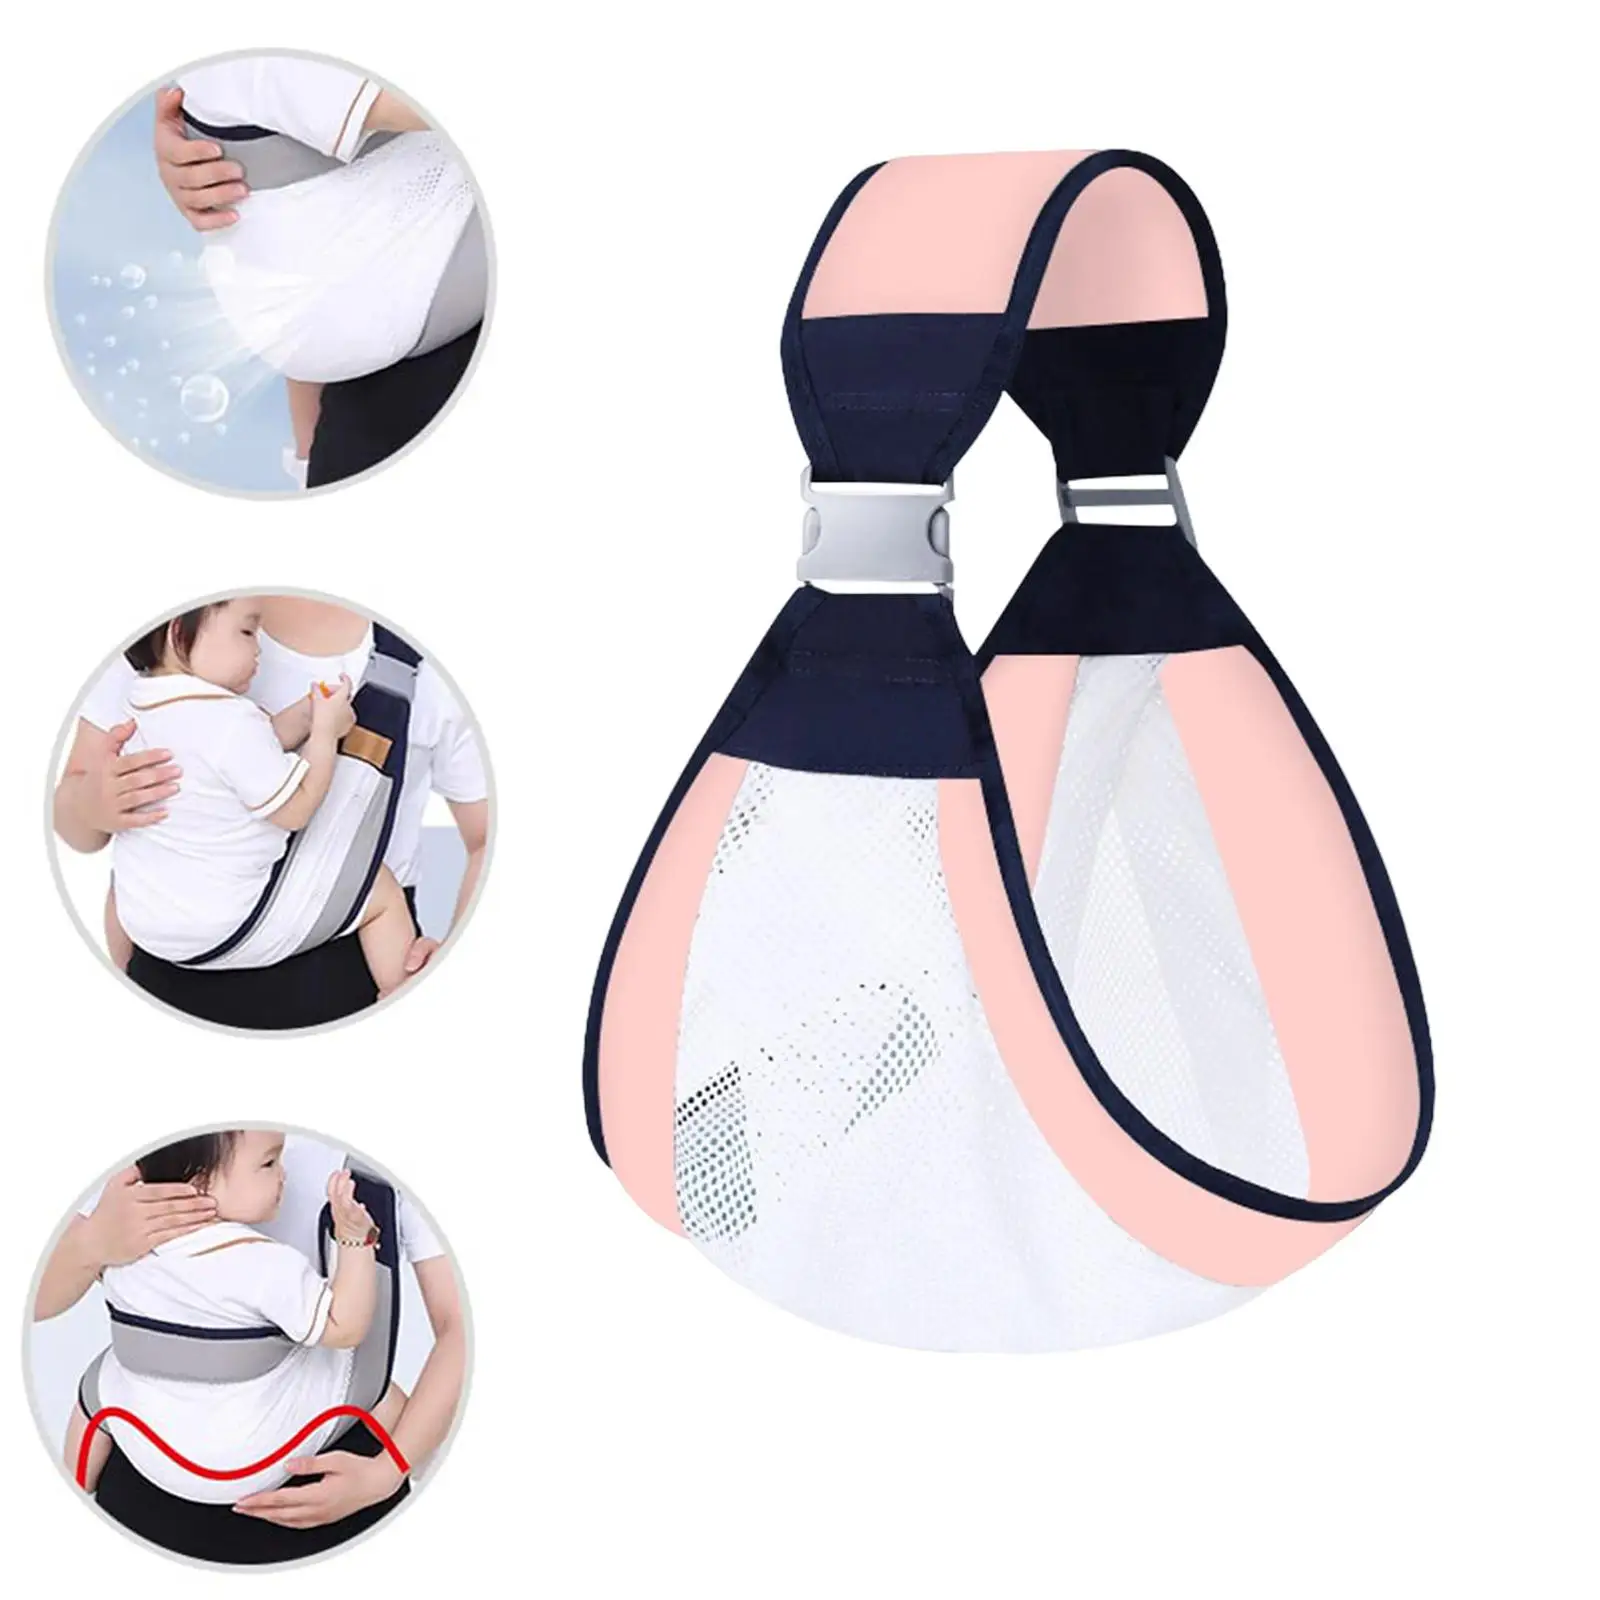 Baby Carrier Breastfeeding Carriers Baby Holder Straps Mesh Infant Wrap Soft